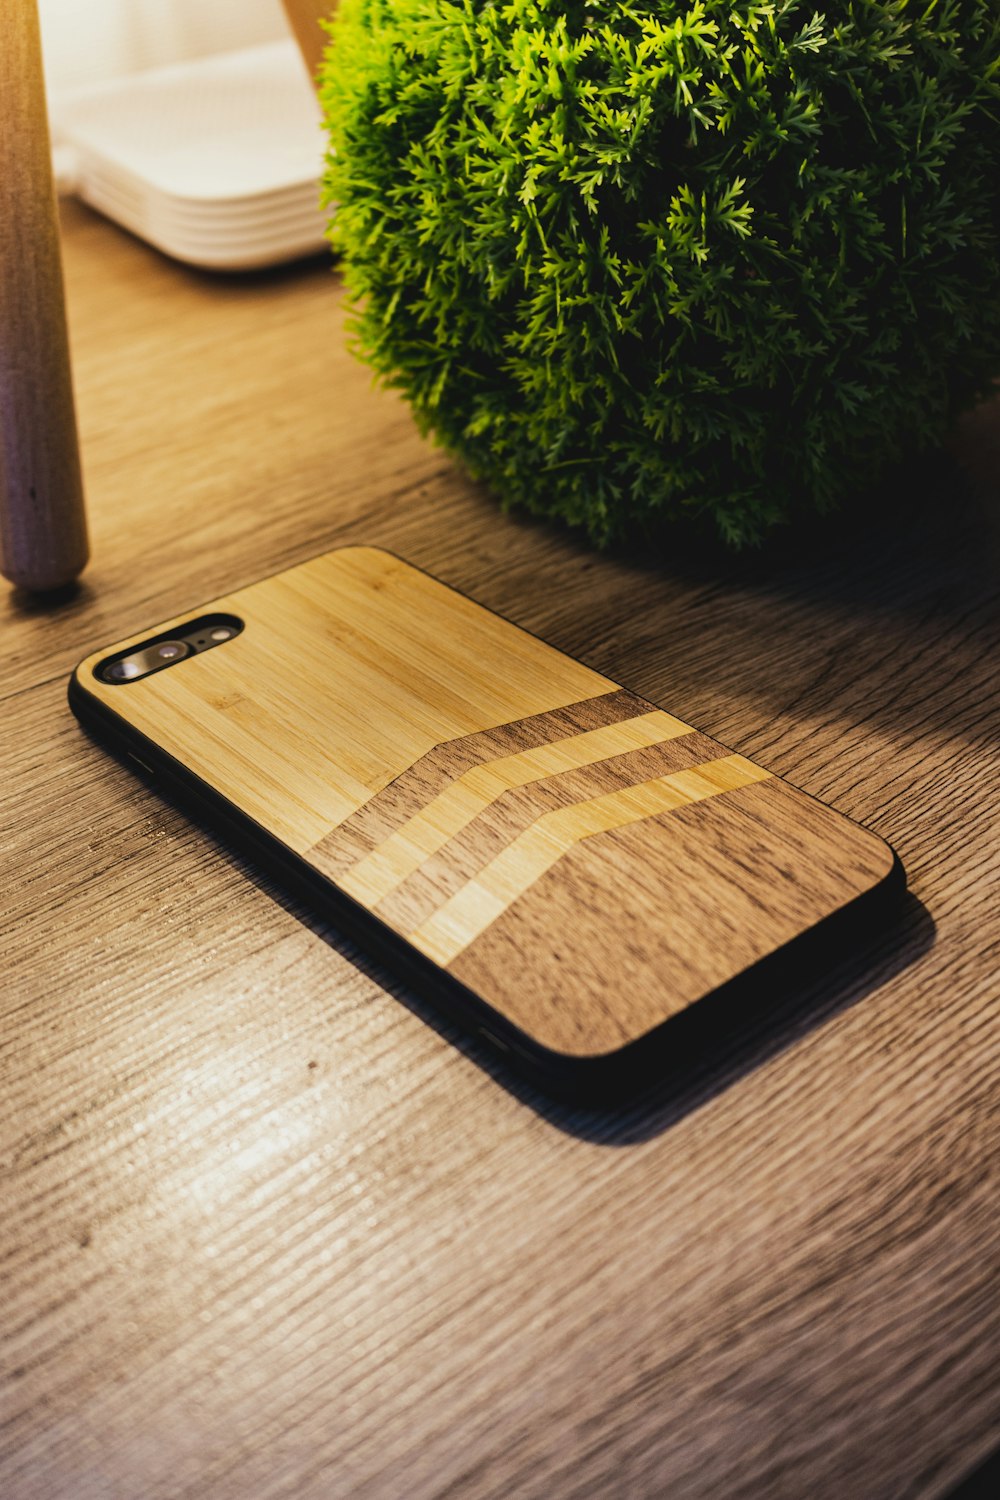 black iphone 7 on brown wooden table